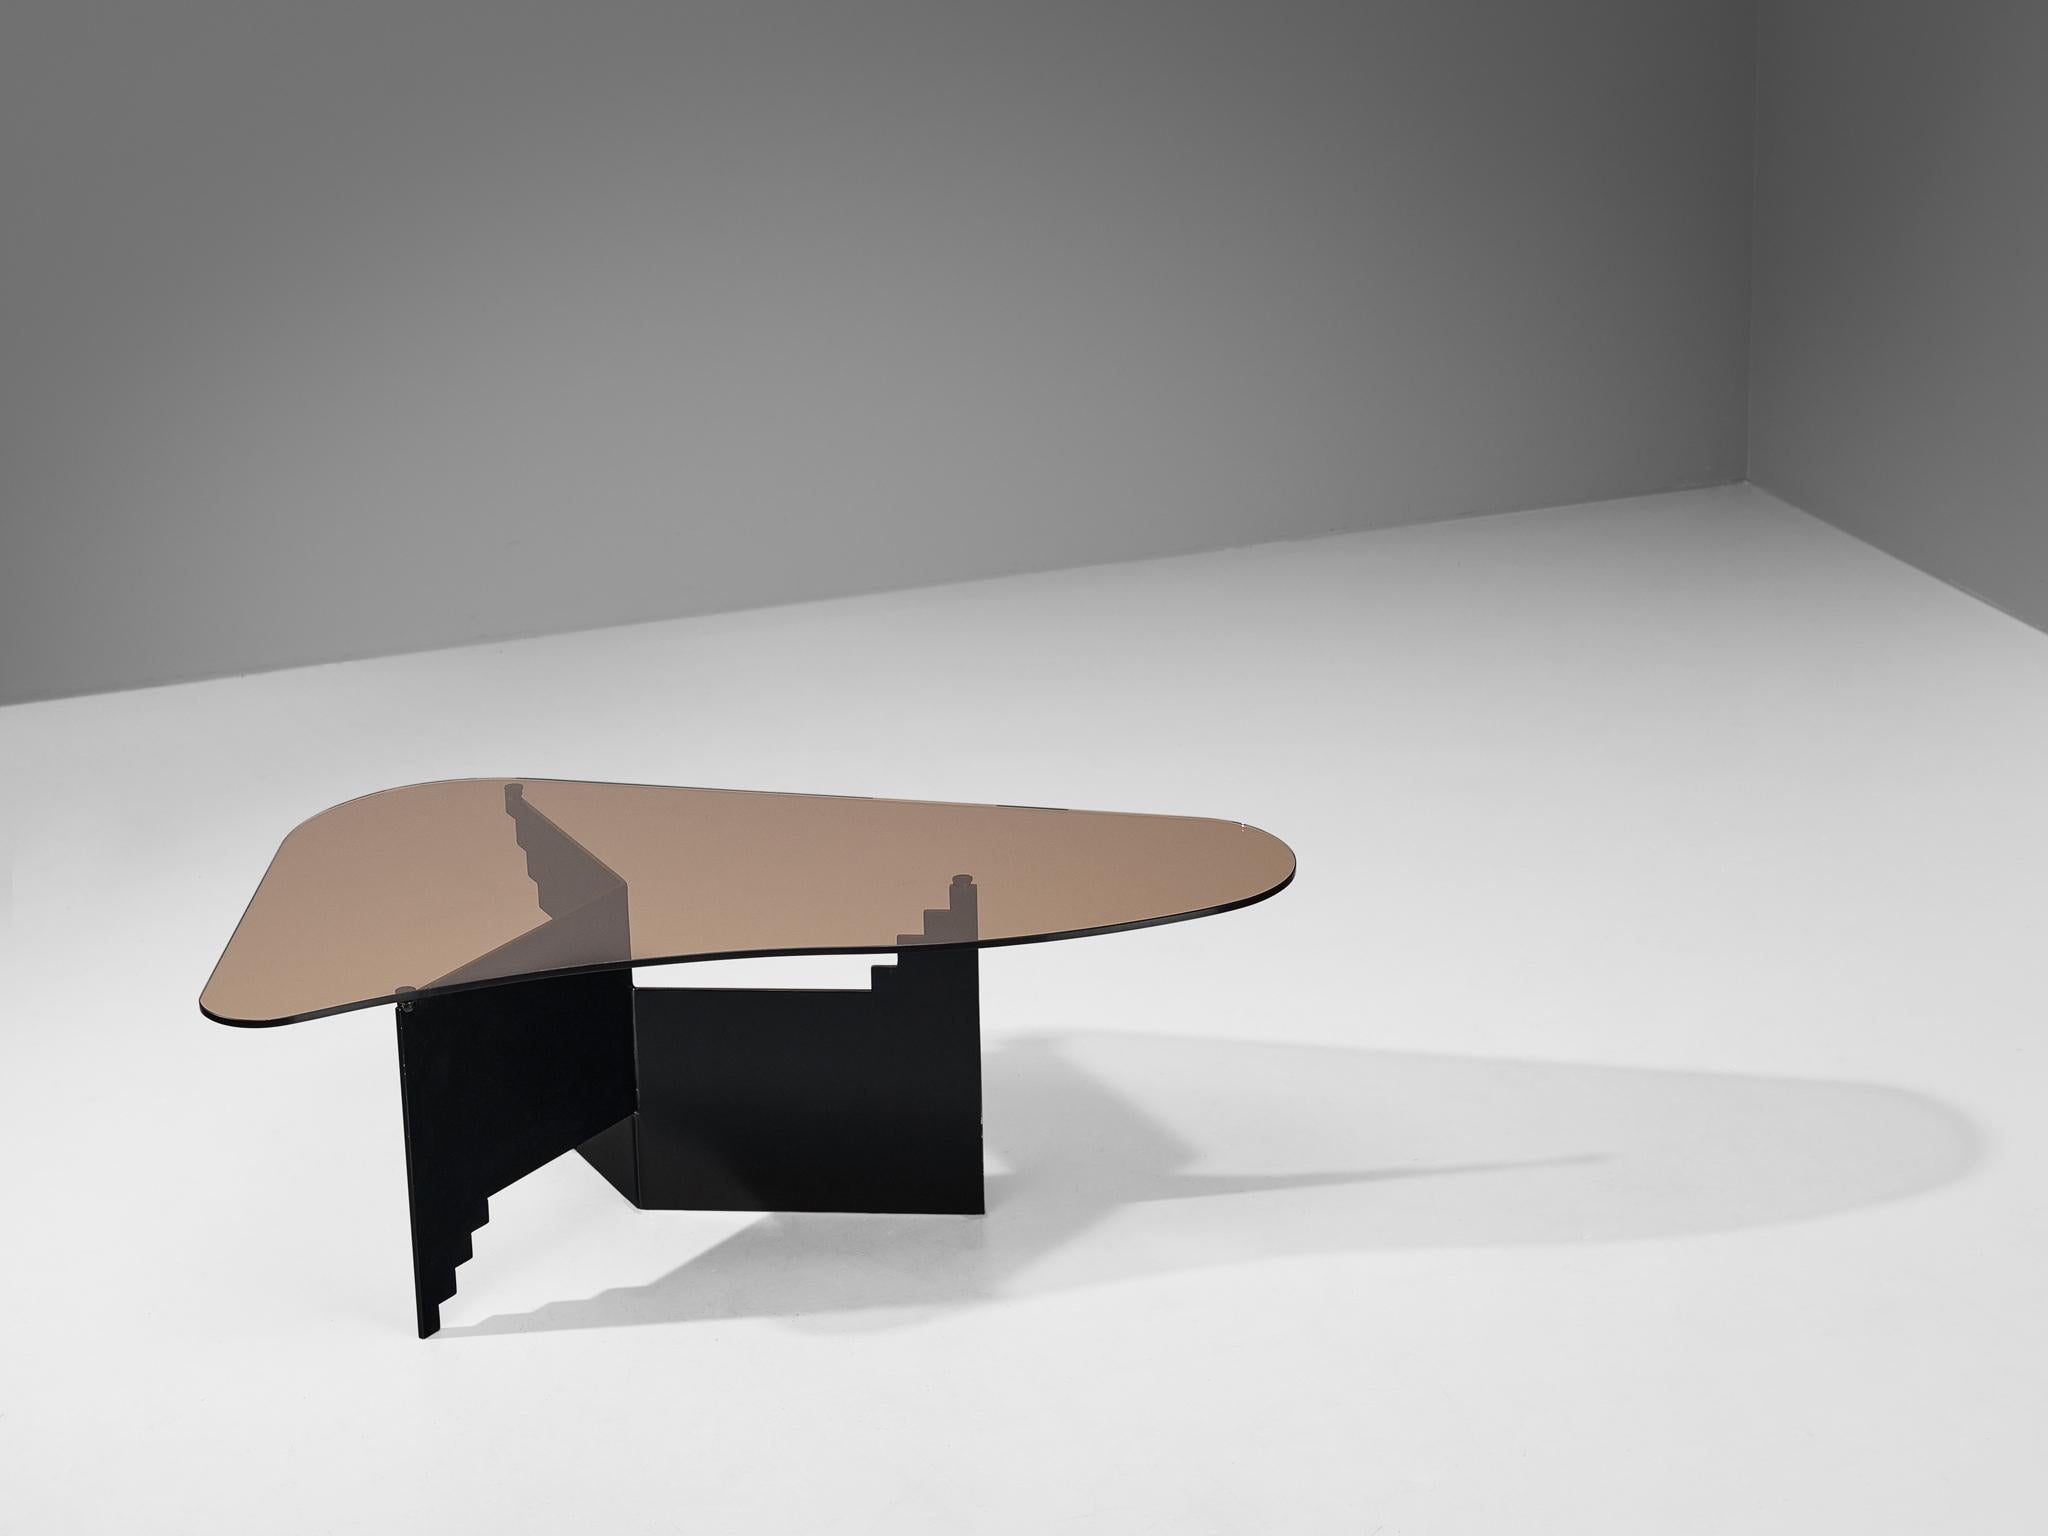 Coffee table, smoked glass, lacquered steel, Italy, 1970s.

This coffee table, which comes from Italy, is remarkably distinctive and visually appealing. The organic, free flowing edges of the tabletop contribute to an organic and natural